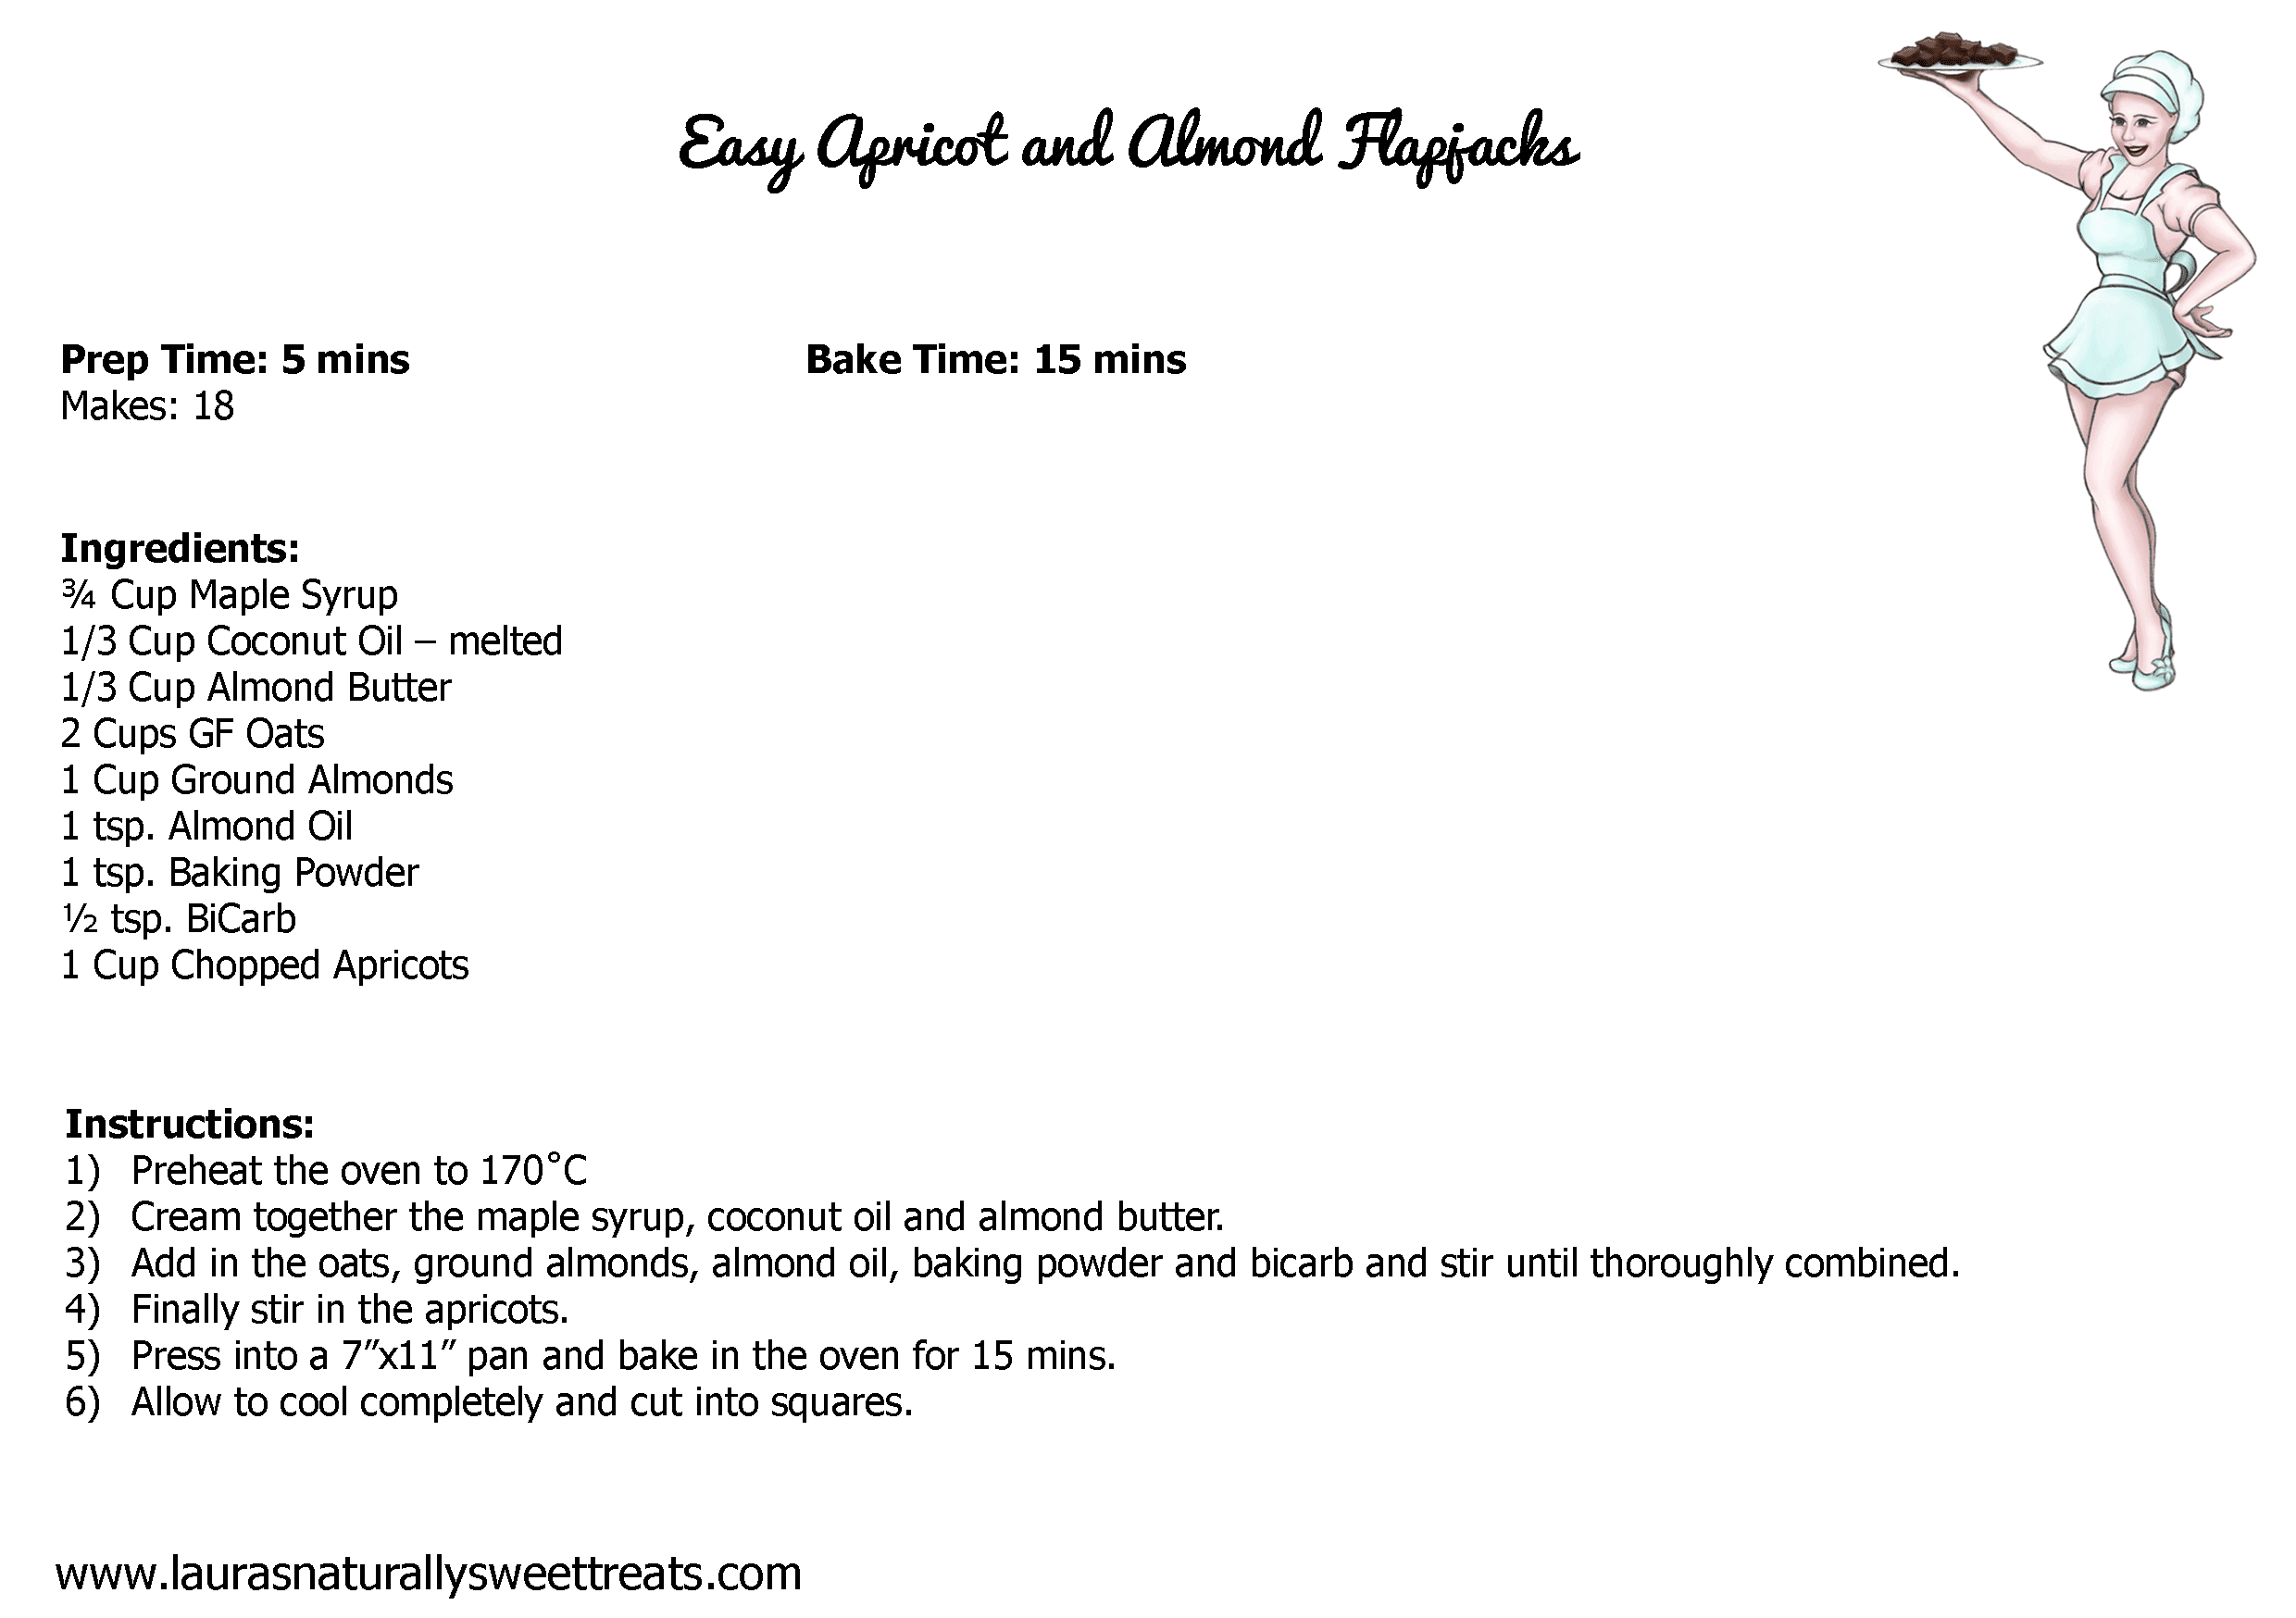 easy apricot and almond flapjacks recipe card